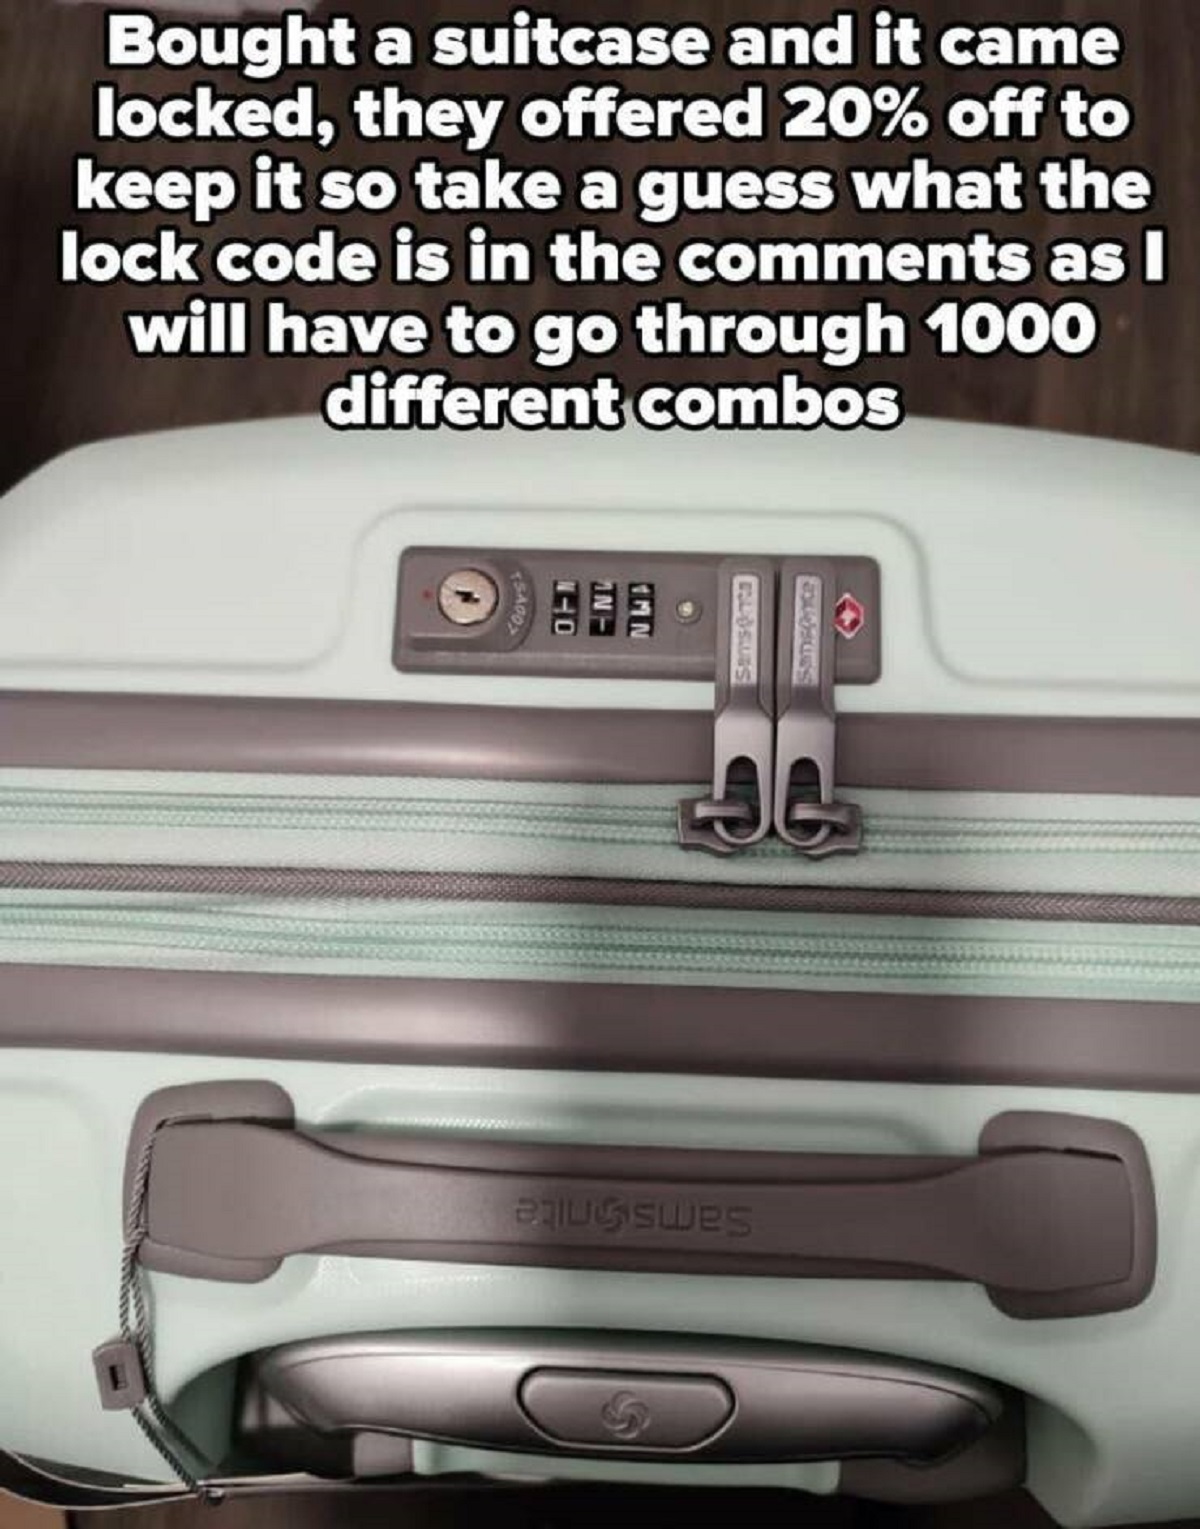 Combination lock - Bought a suitcase and it came locked, they offered 20% off to keep it so take a guess what the lock code is in the as I will have to go through 1000 different combos 15A00 Budsurs Sansonce awes